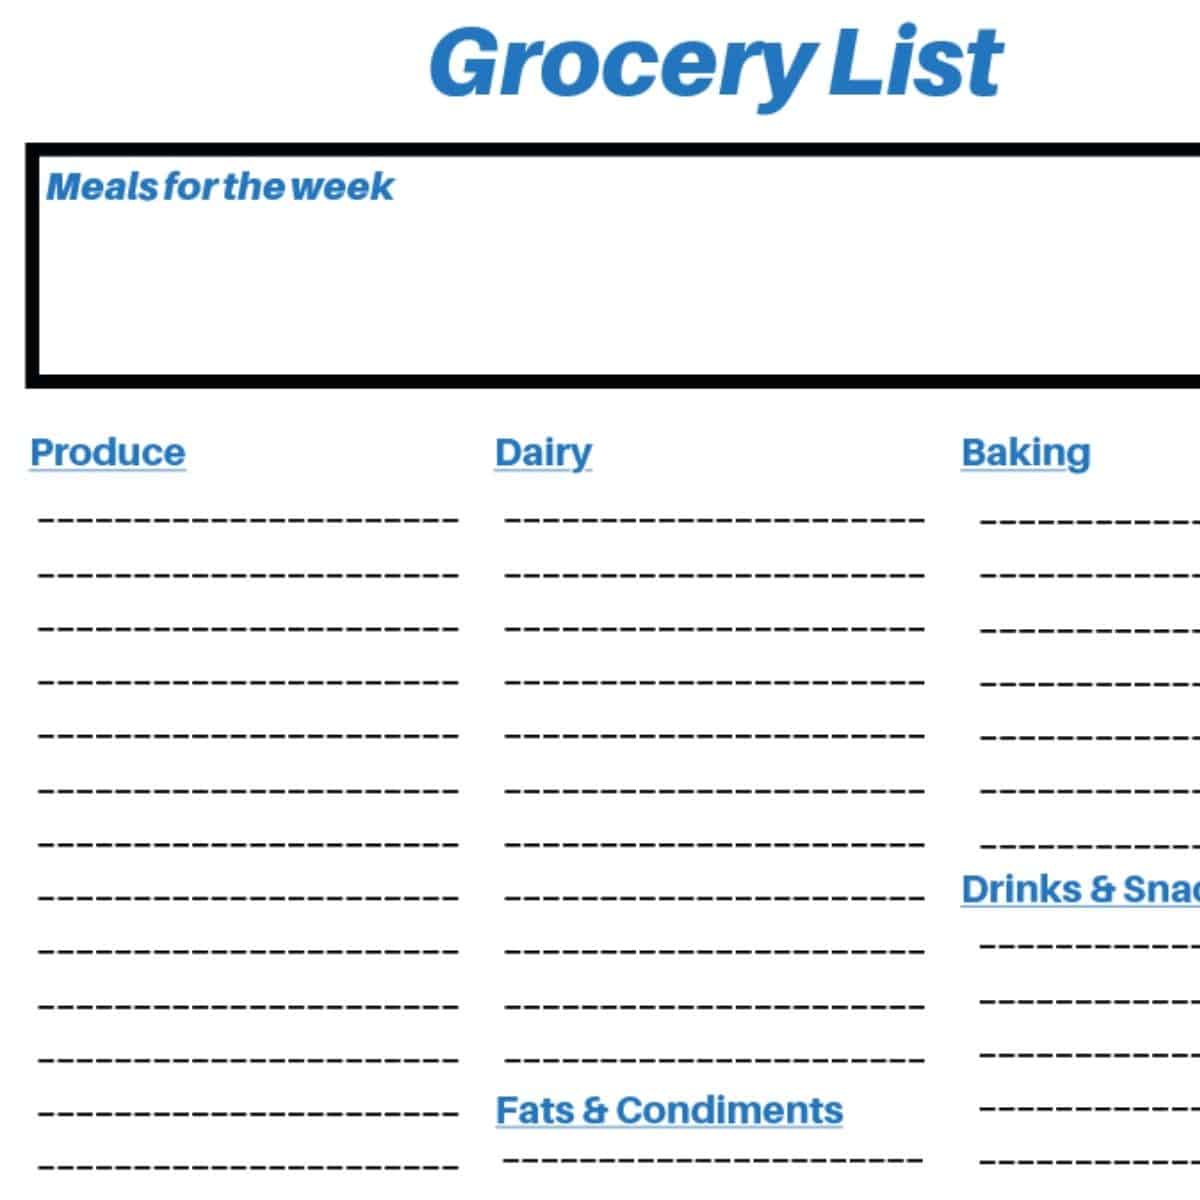 grocery list - The Ultimate Keto Guide to Keep Total Carbs Under 10 Grams